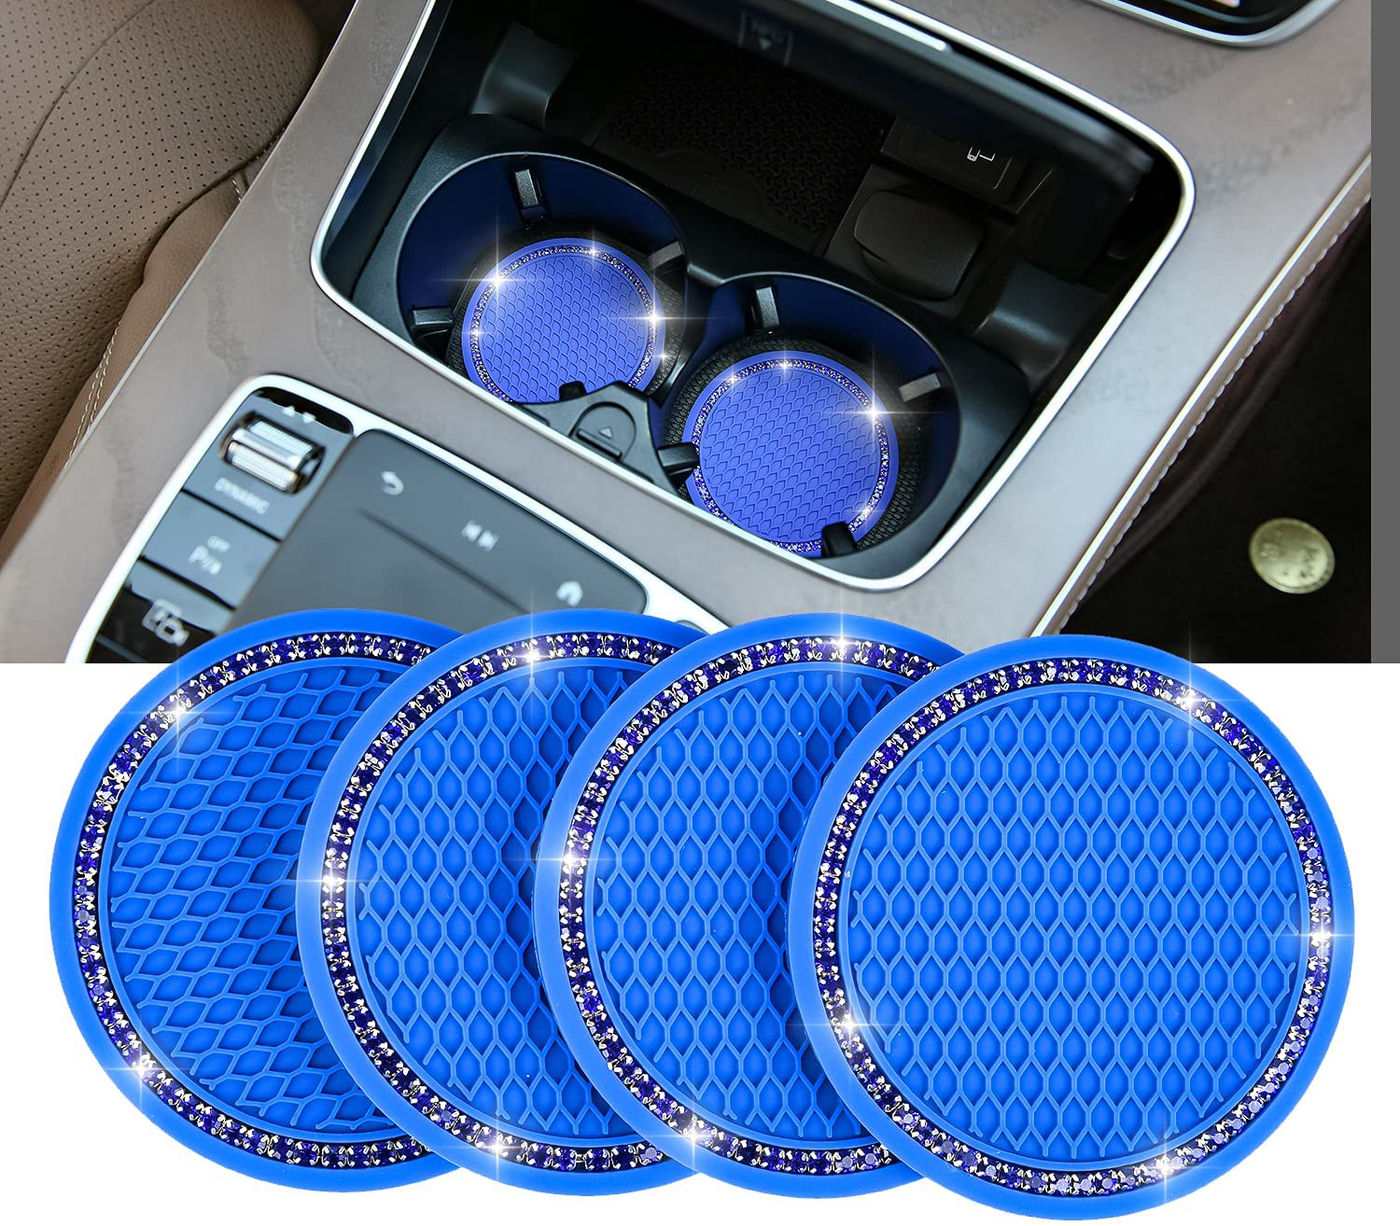 Valleycomfy 4PCS Bling Car Coasters, Universal Vehicle Bling Car Accessories -2.75 inch Silicone Anti Slip Crystal Rhinestone Cup Holder Coasters for Car (Black)